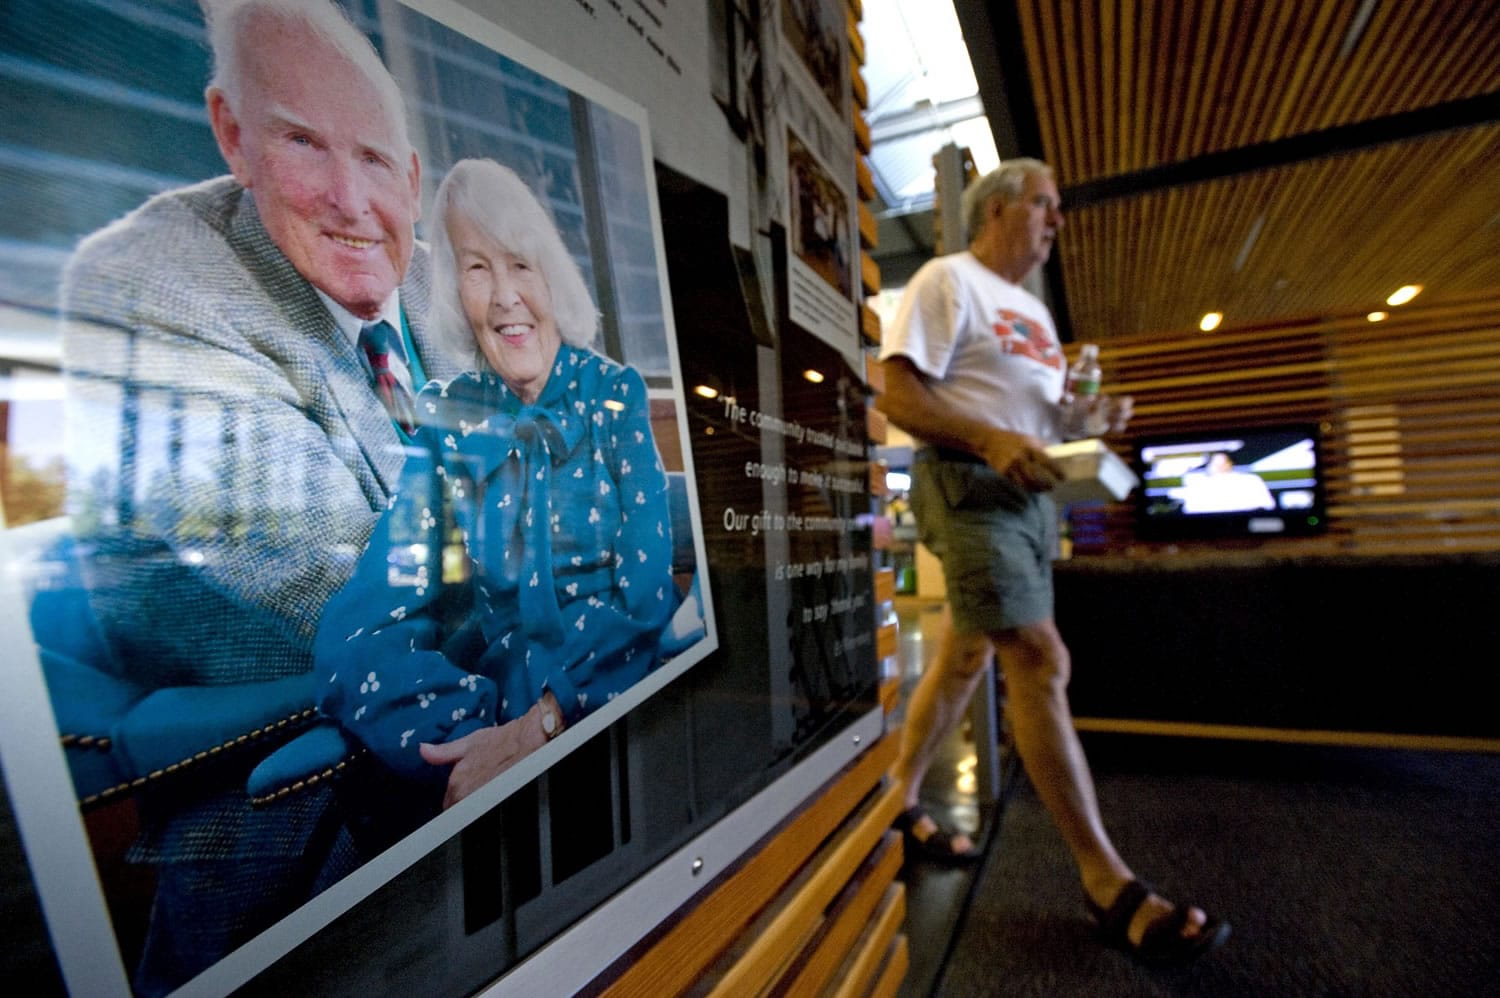 Rolf Adams, of Vancouver, walks past a photograph of Ed and Mary Firstenburg inside the lobby of the Firstenburg Community Center on Aug. 23, 2010.